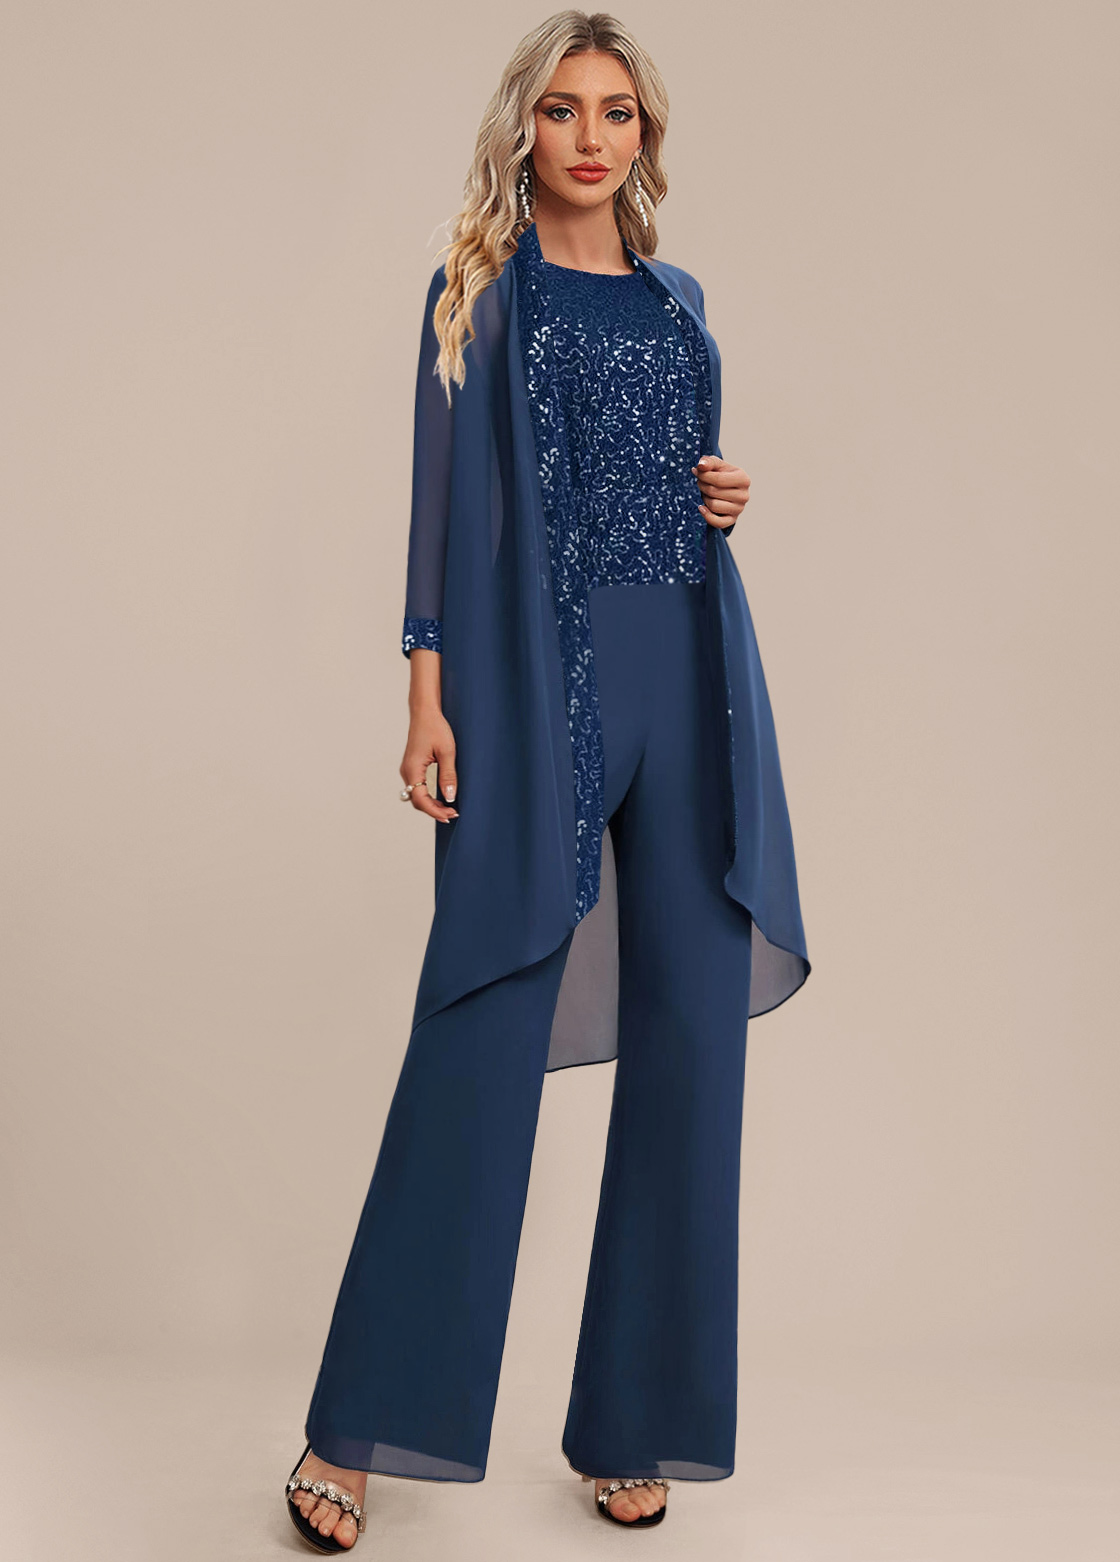 Patchwork Long Round Neck Sleeveless Navy Jumpsuit and Cardigan